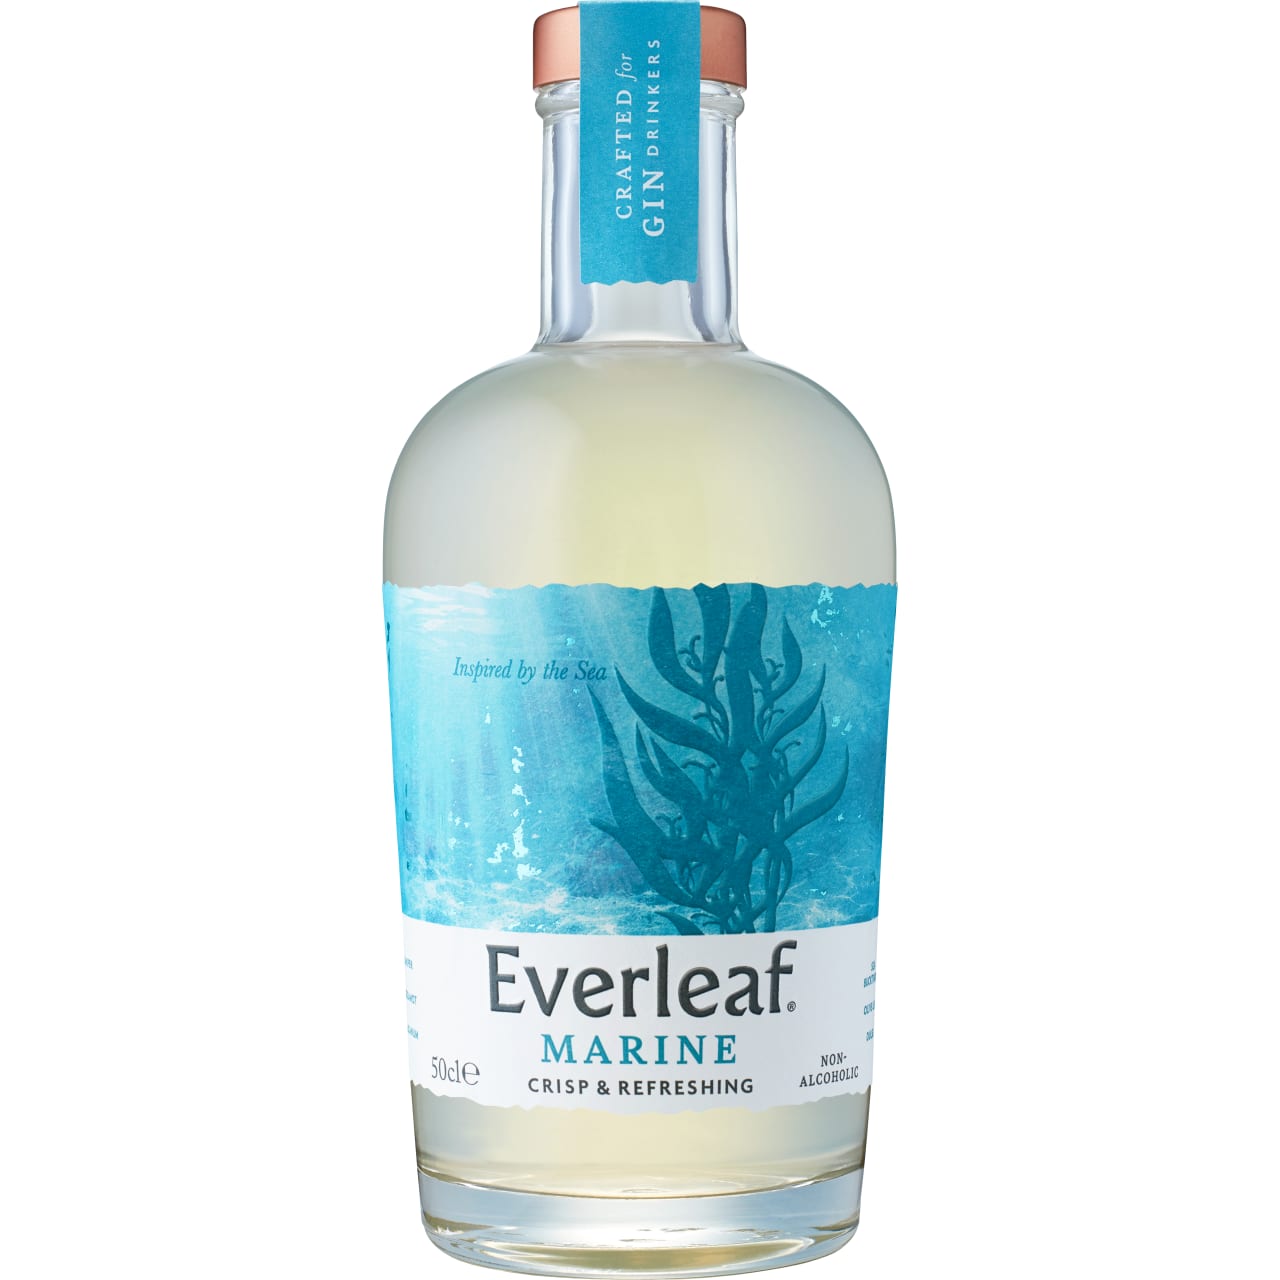 A crisp, refreshing marine-inspired non-alcoholic aperitif from Everleaf, created with gin-lovers in mind.